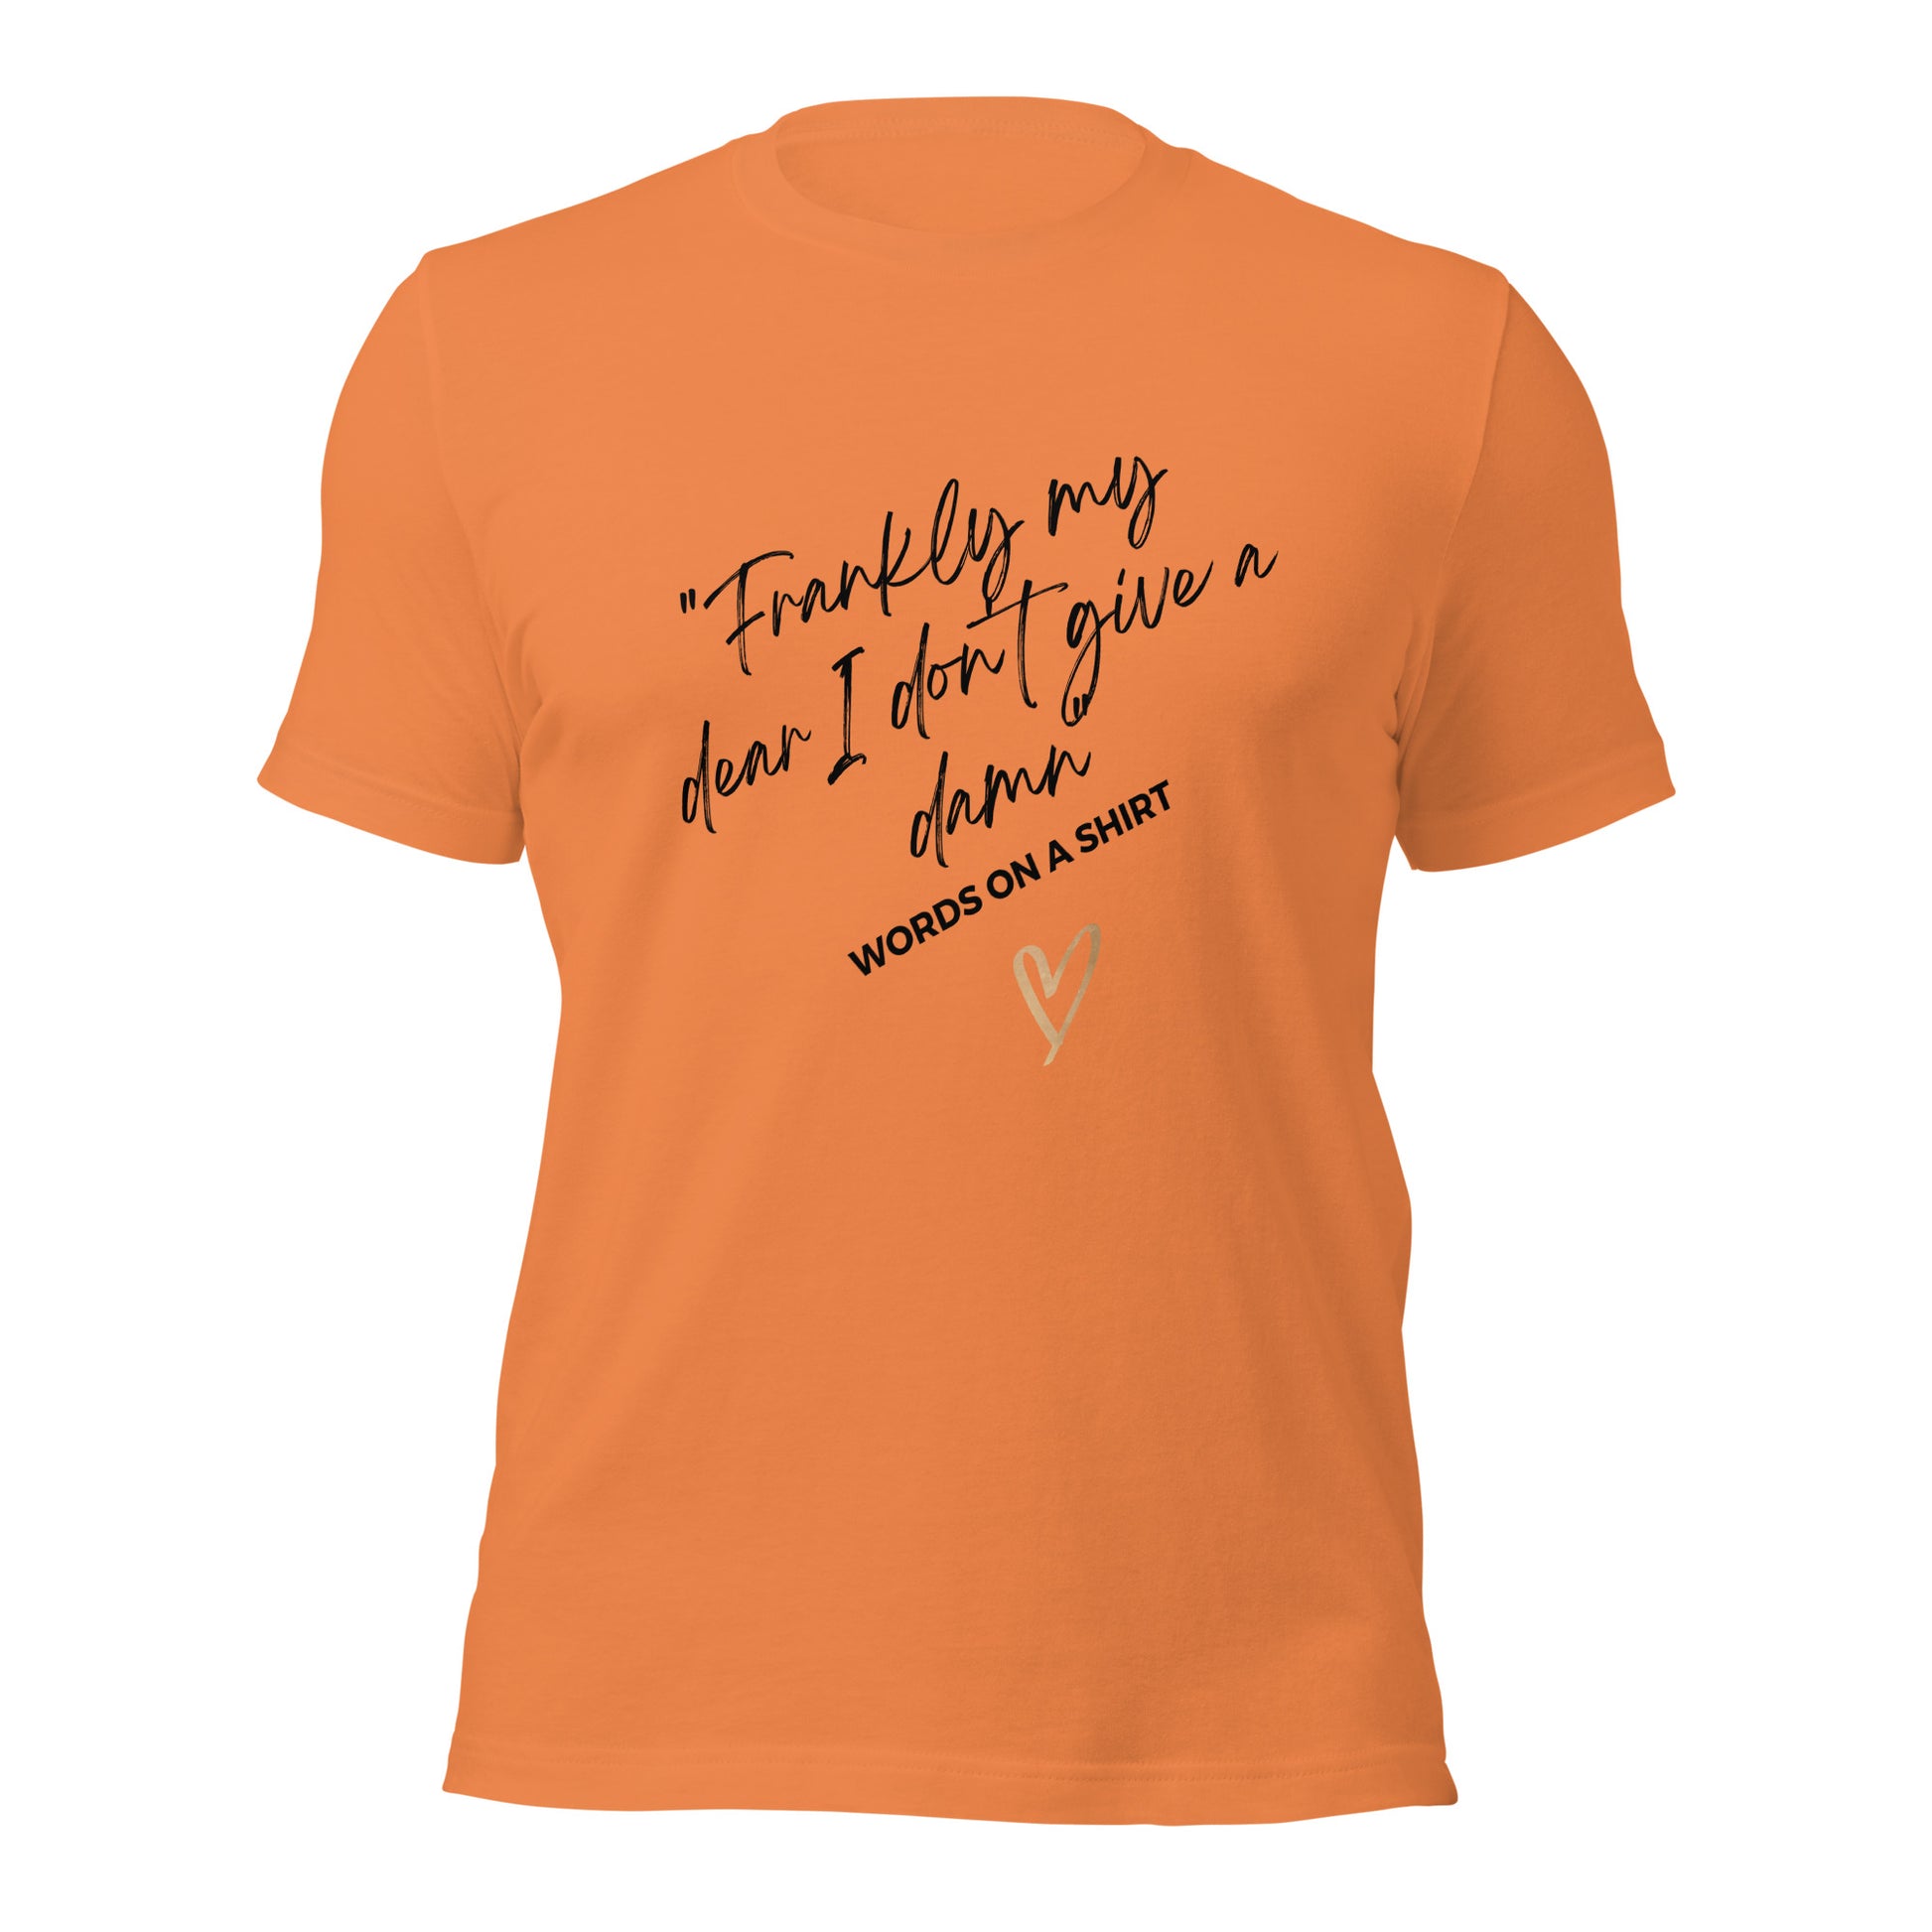 You just can't go wrong with this offer - indulge in the highest quality 100% cotton, pre-shrunk fabric for a perfect fit, and show your love for Gone With The Wind with the iconic "Frankly My Dear, I Don't Give A Damn" quote - why pass it up? This is one you won't want to miss - add it to your cart now!